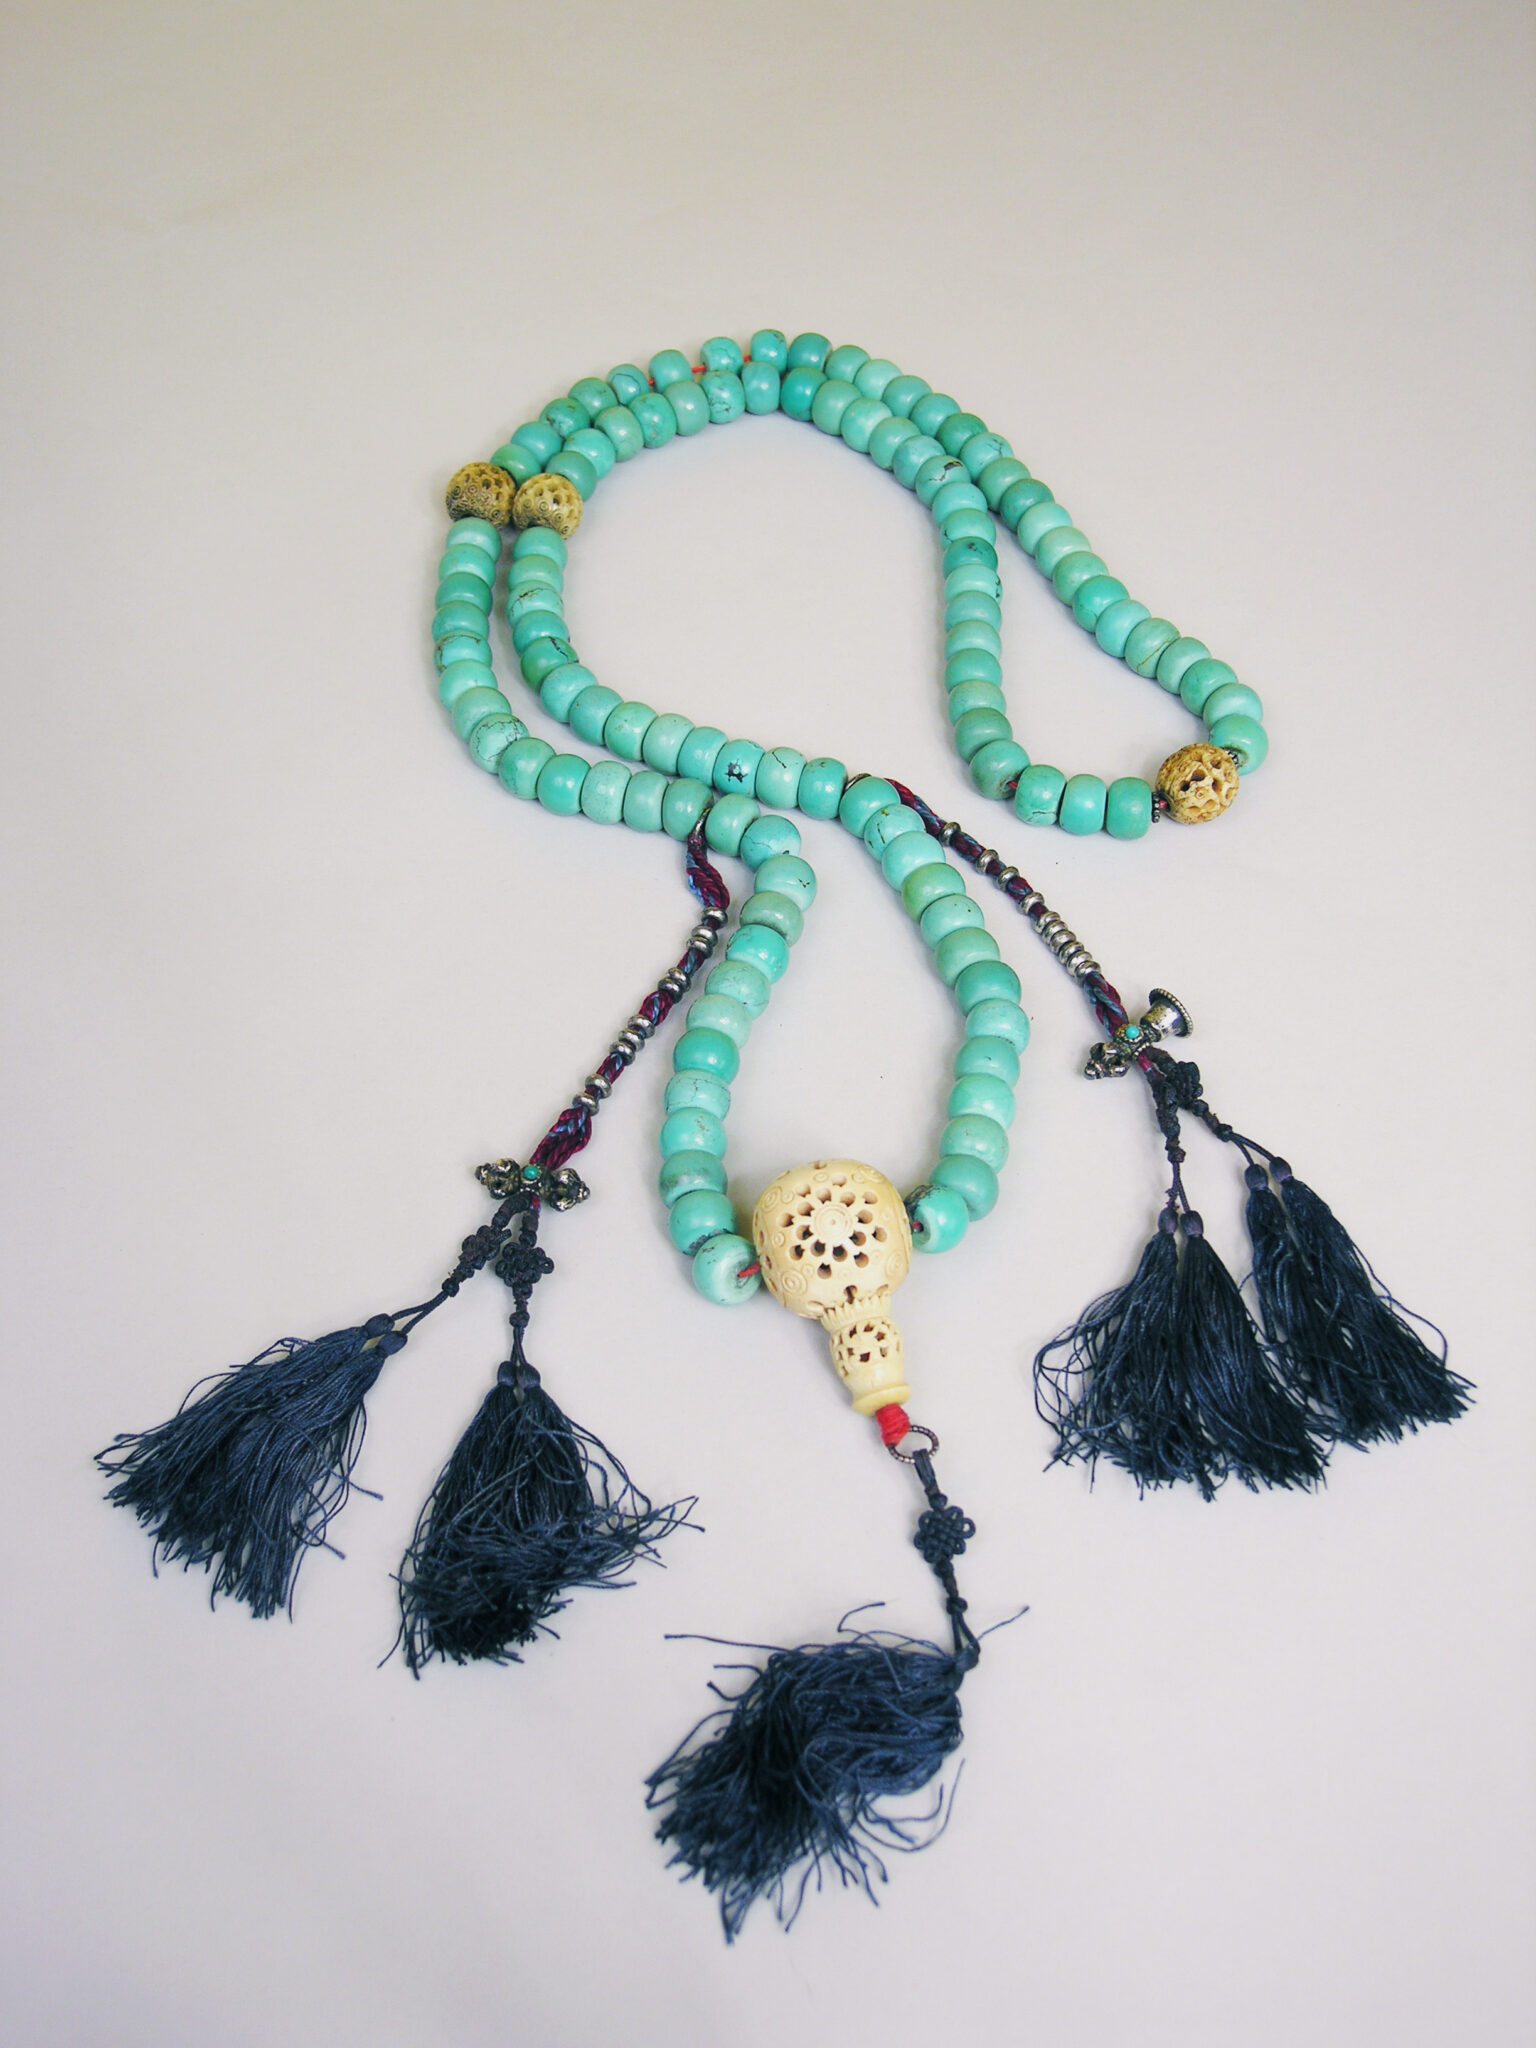 Loosely arranged string of turquoise beads with carved bone centerpiece and five dark-blue tassels